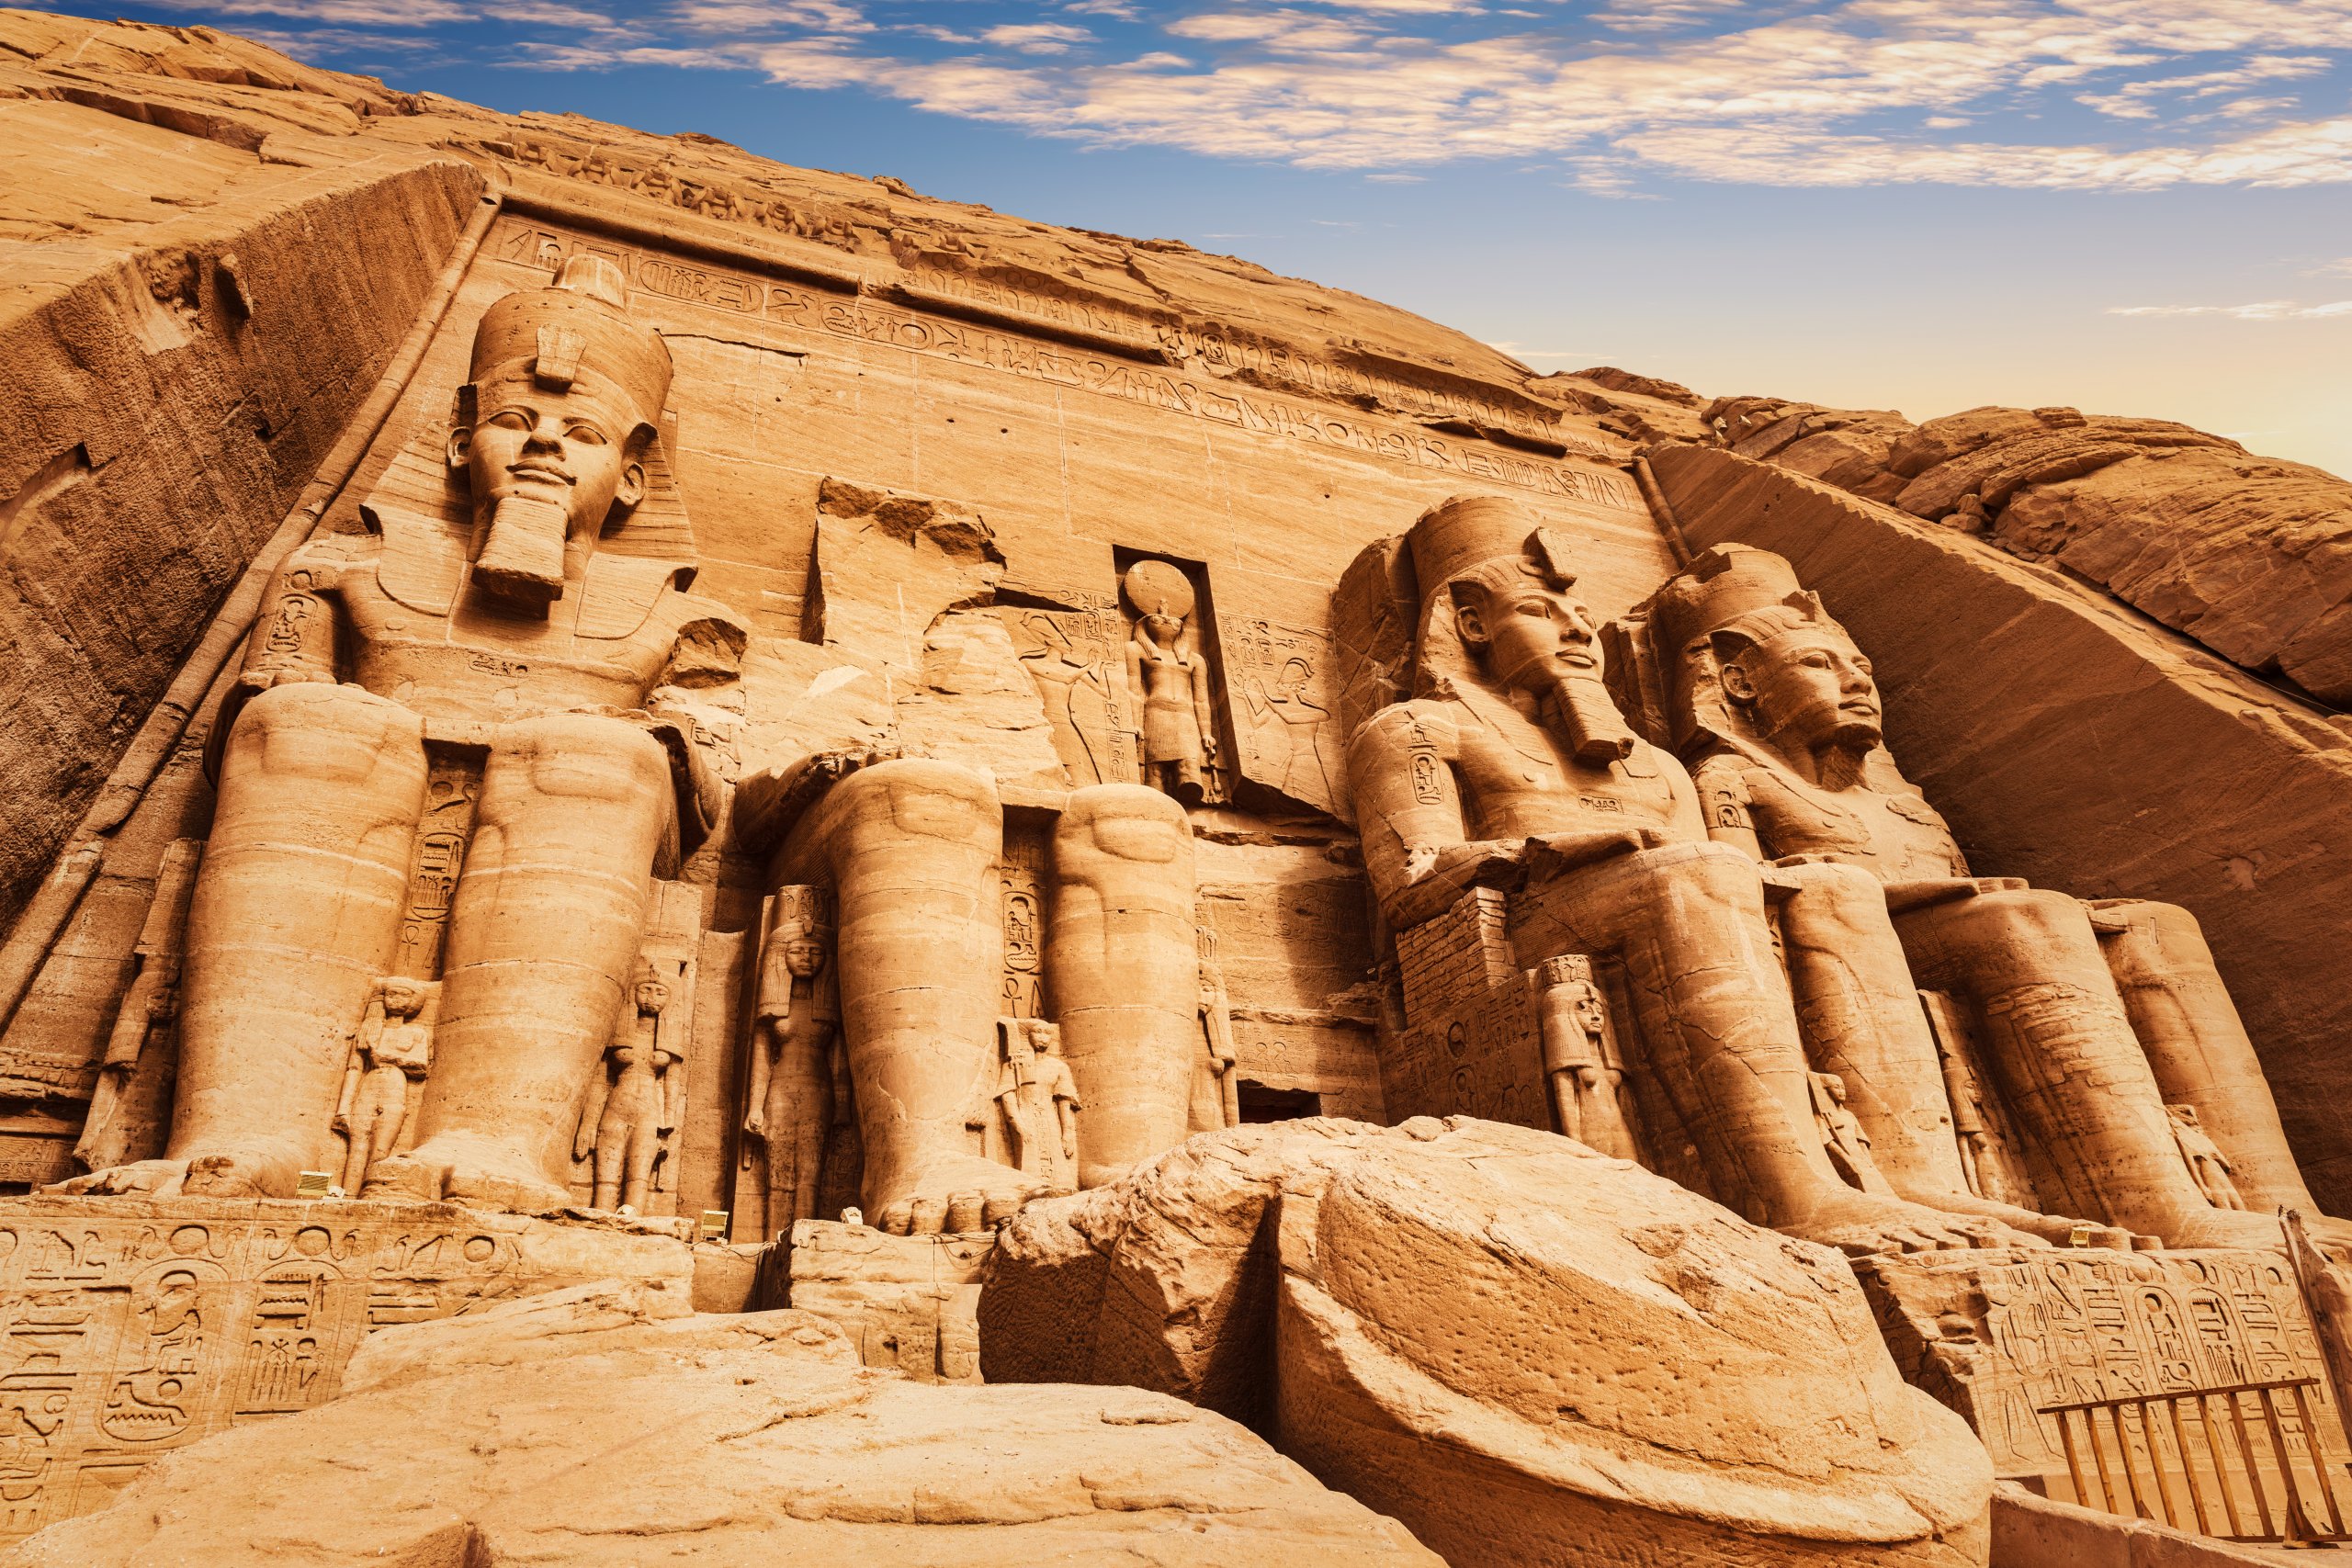 Abu Simbel, the Great Temple of Ramesses II close view, Egypt